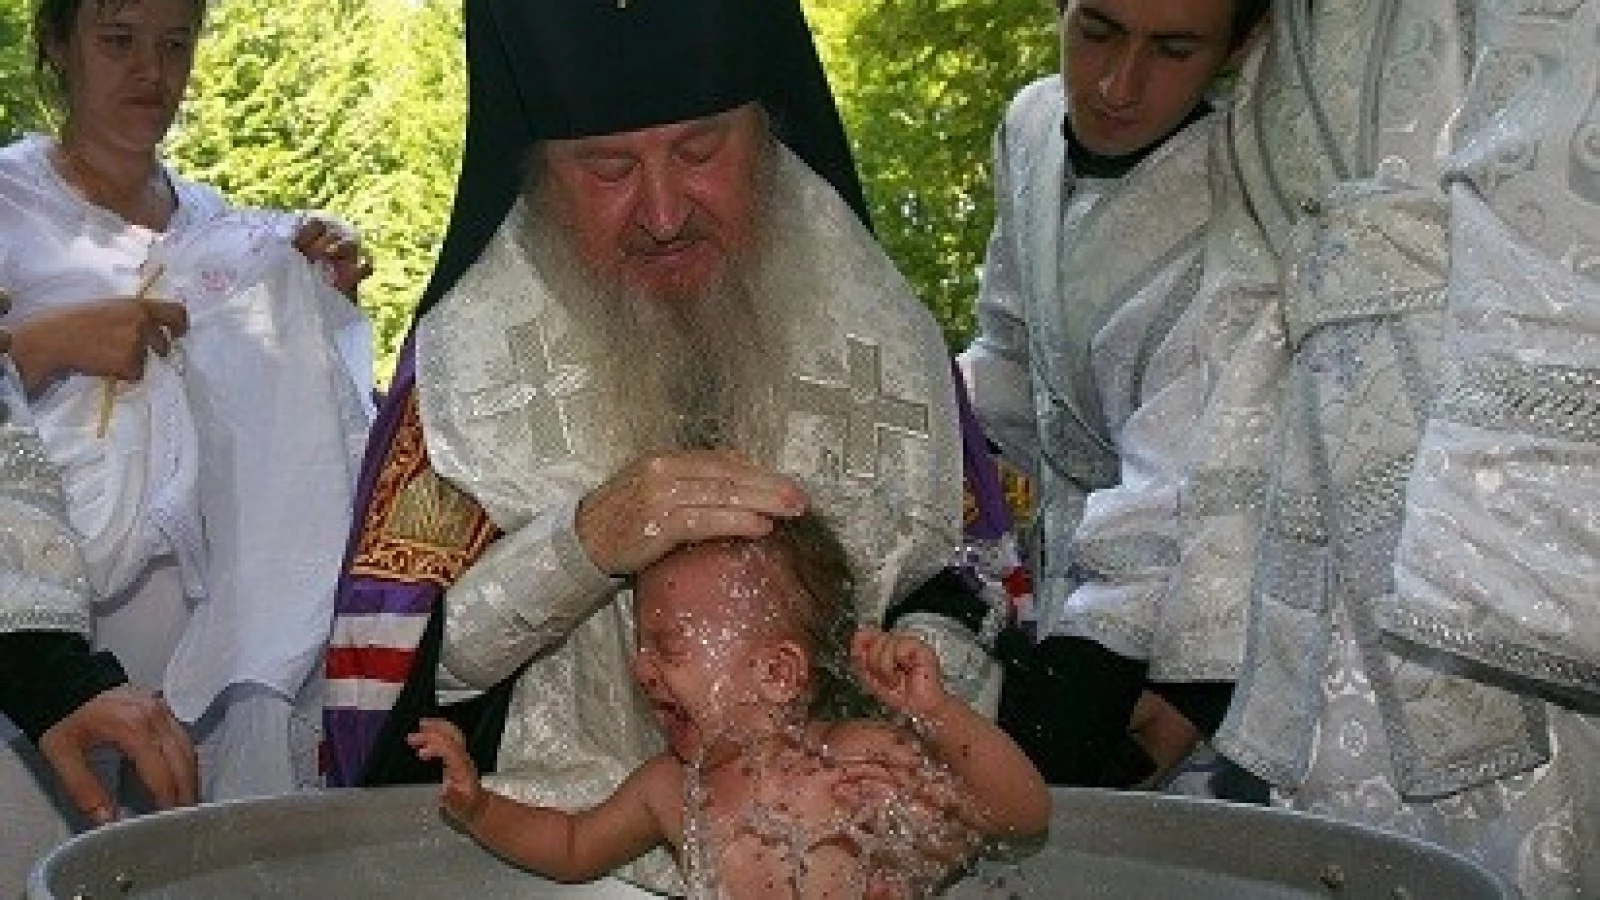 Accident During Baptism